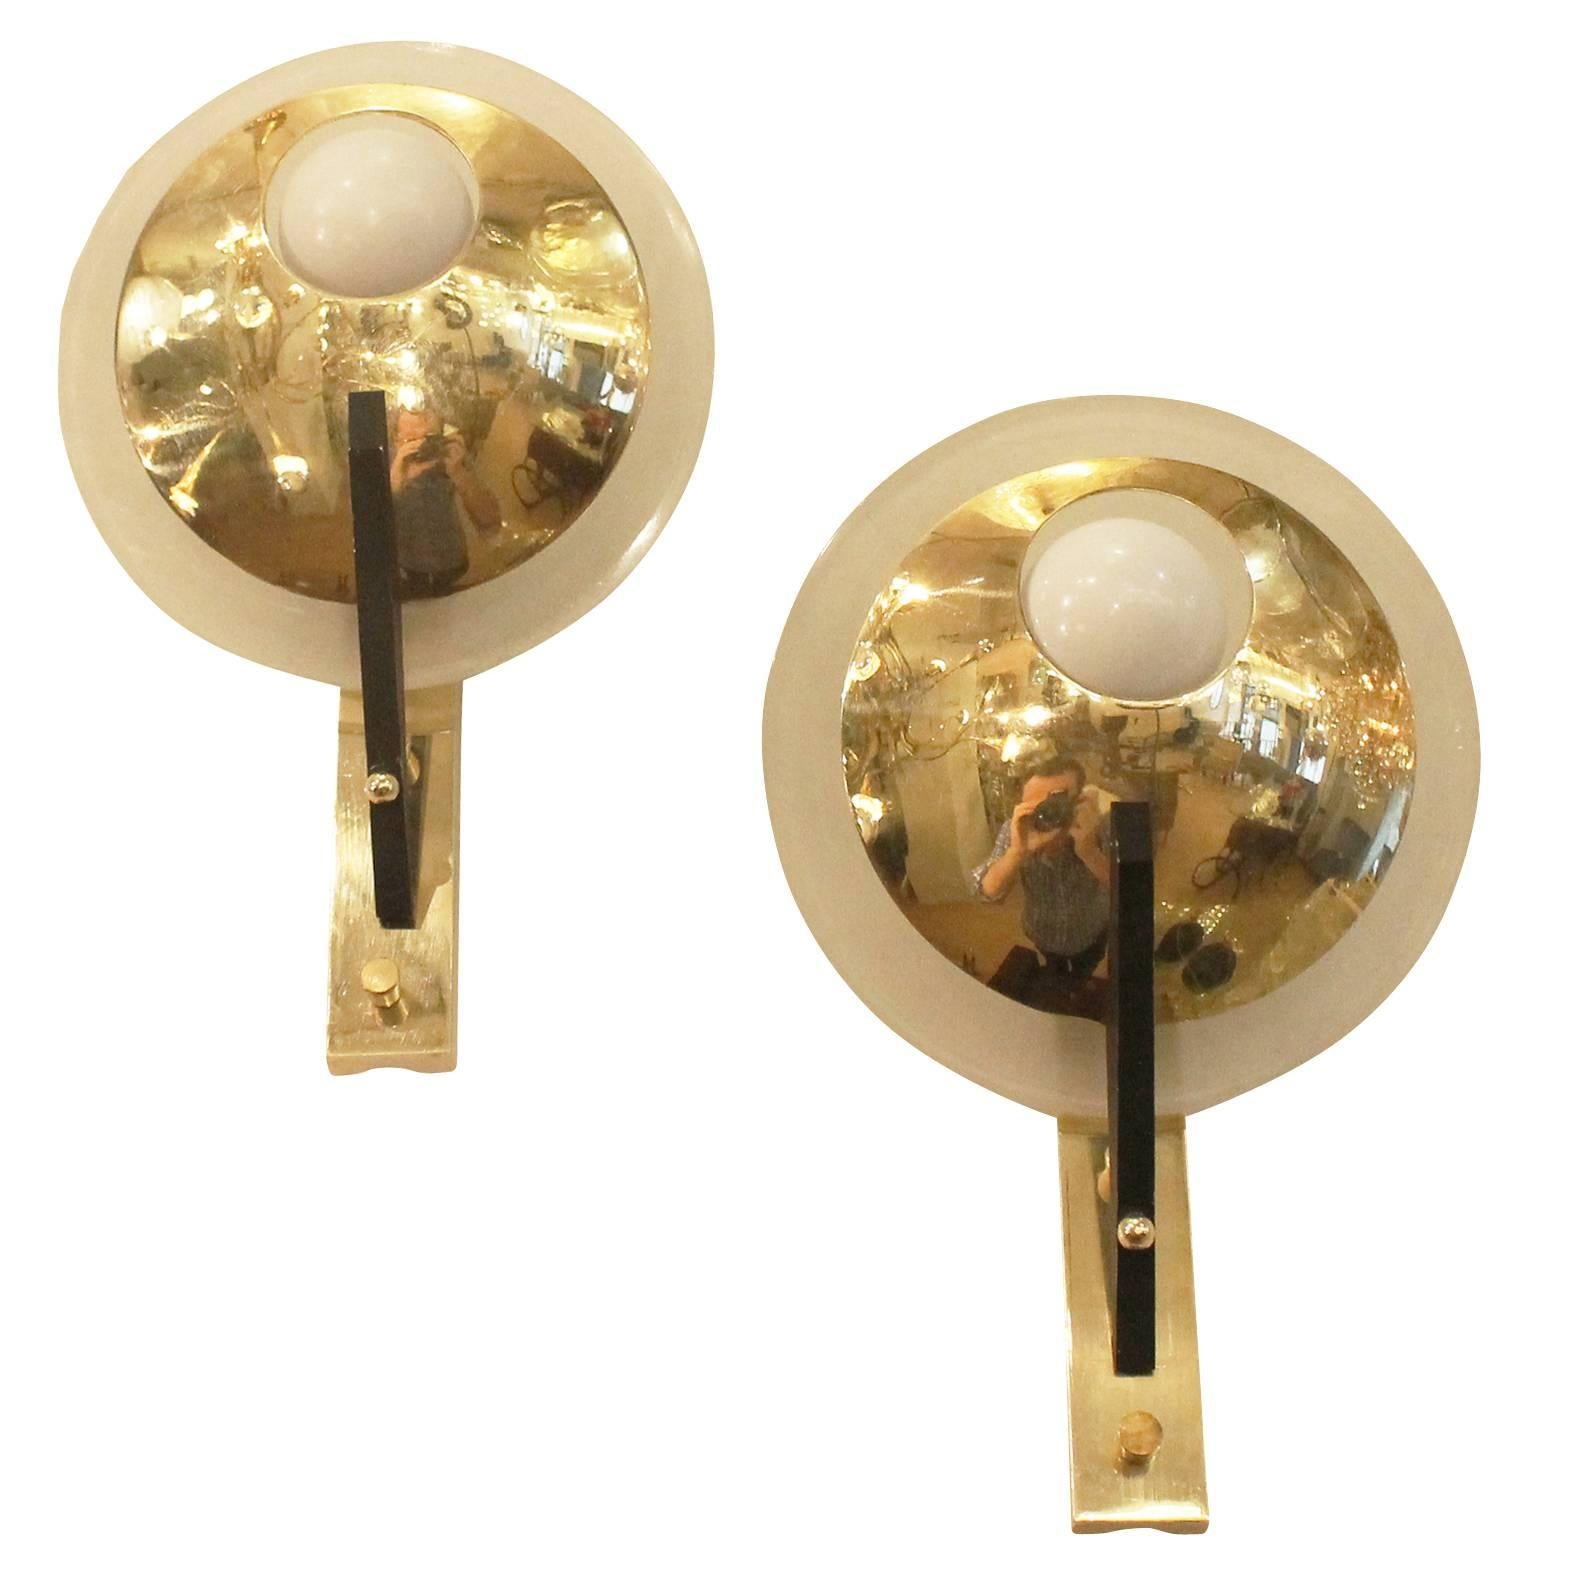 Charming diminutive wall lights by Stilnovo made of brass, glass and black painted metal. The single candelabra light bulb is partially covered at the front by a brass plate and at the back by a frosted glass plate. Perfect for adding a touch of